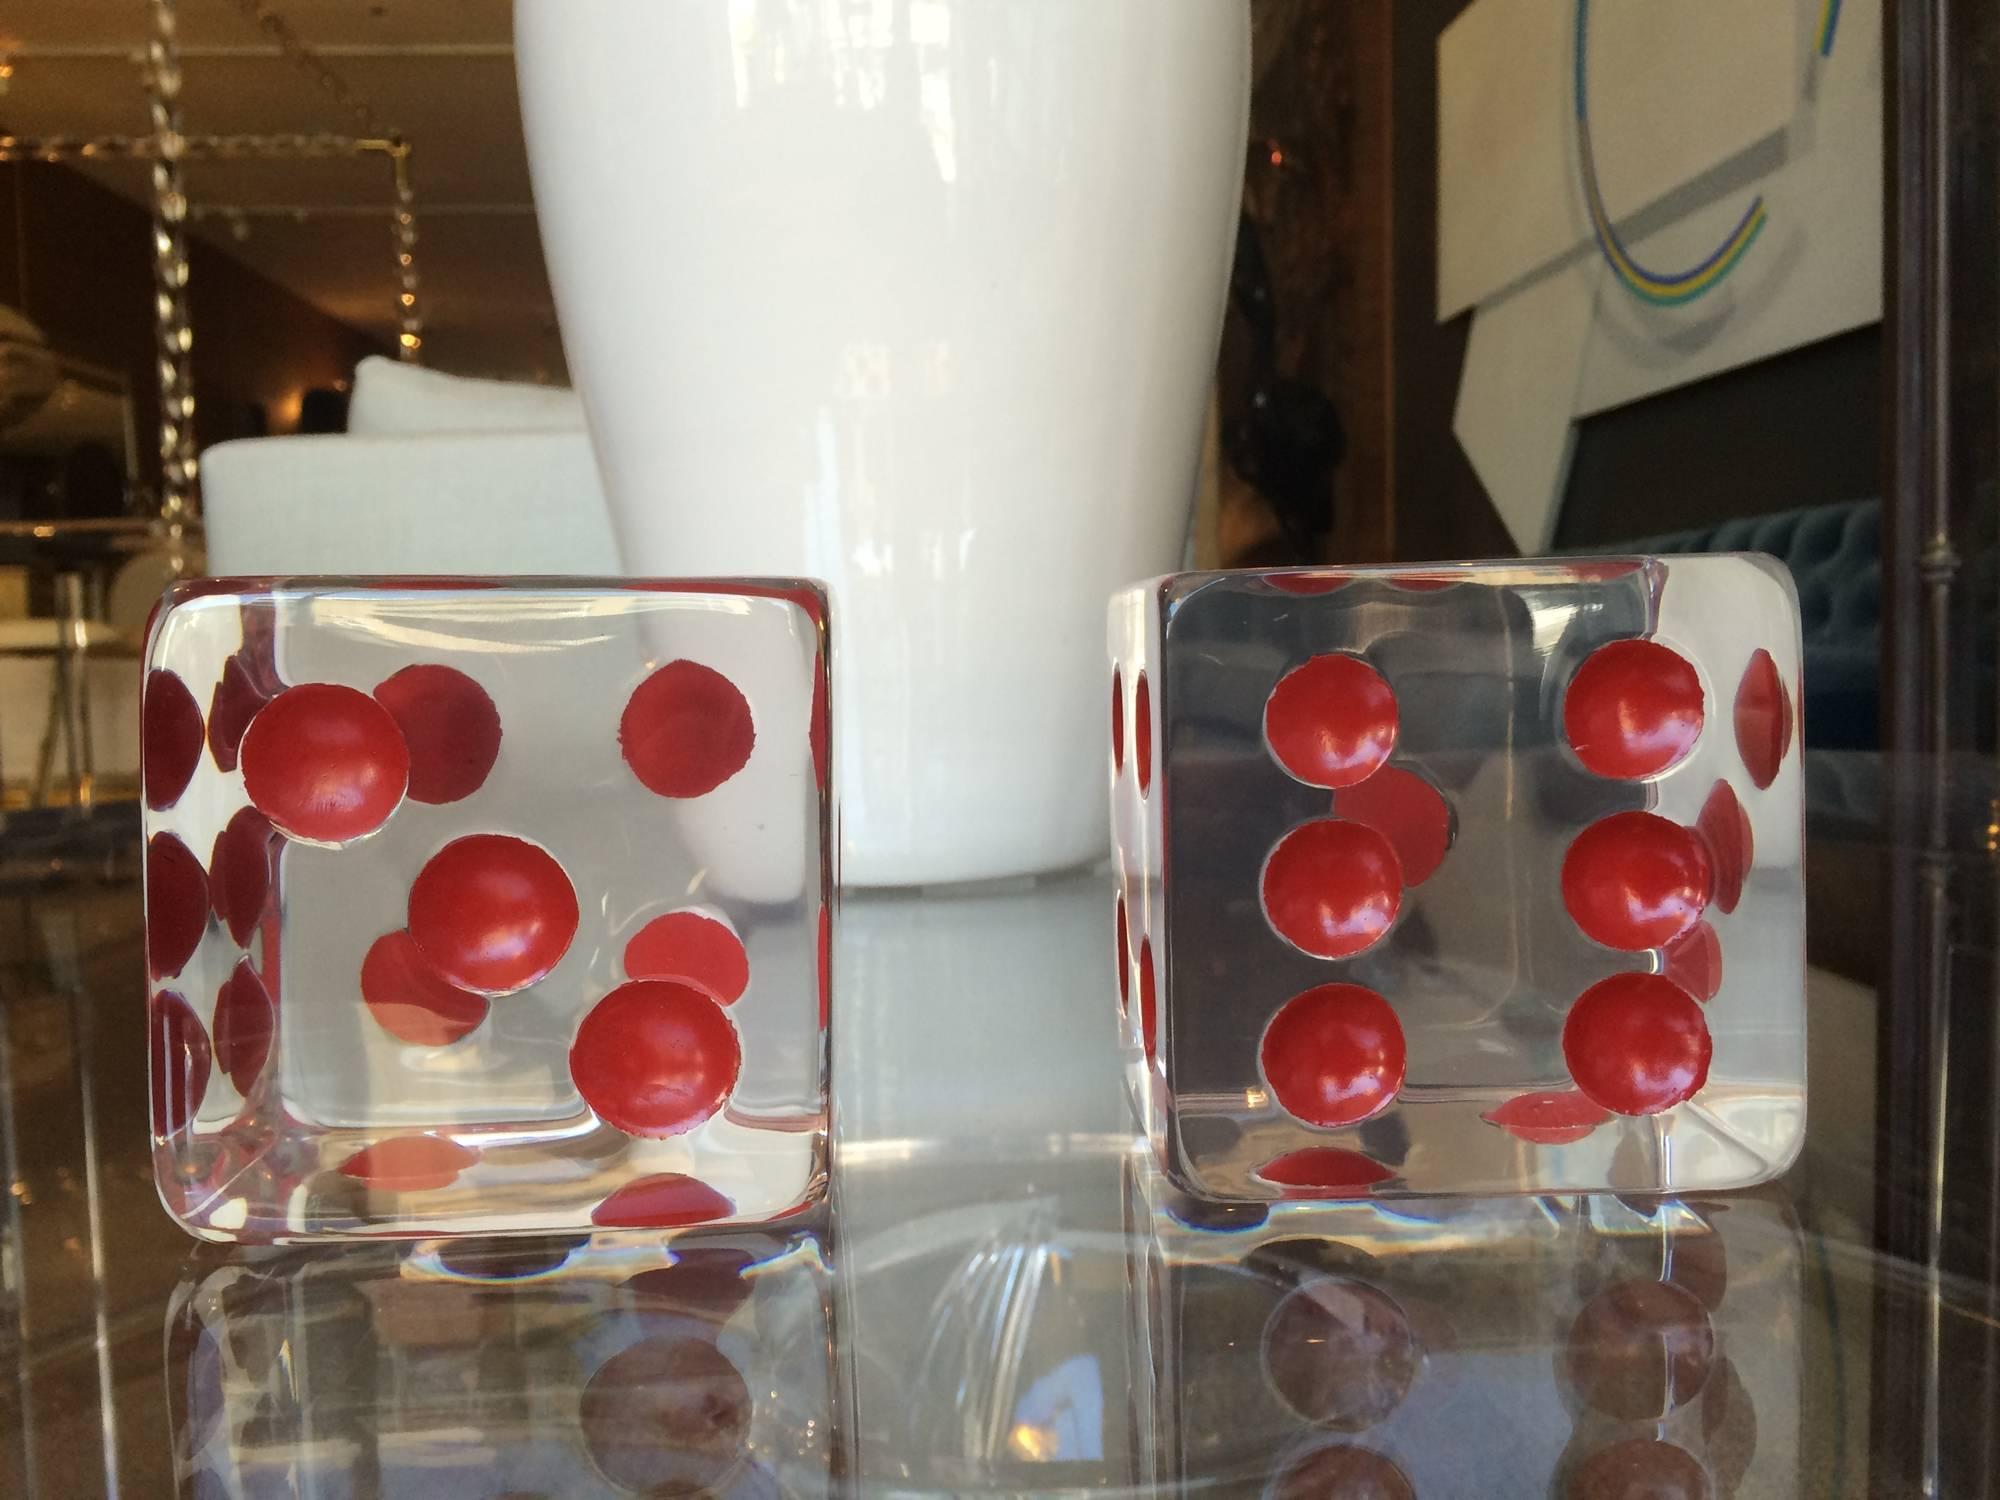 Mid-Century Modern Oversized Dice Sculpture with Red Dots by Charles Hollis Jones For Sale